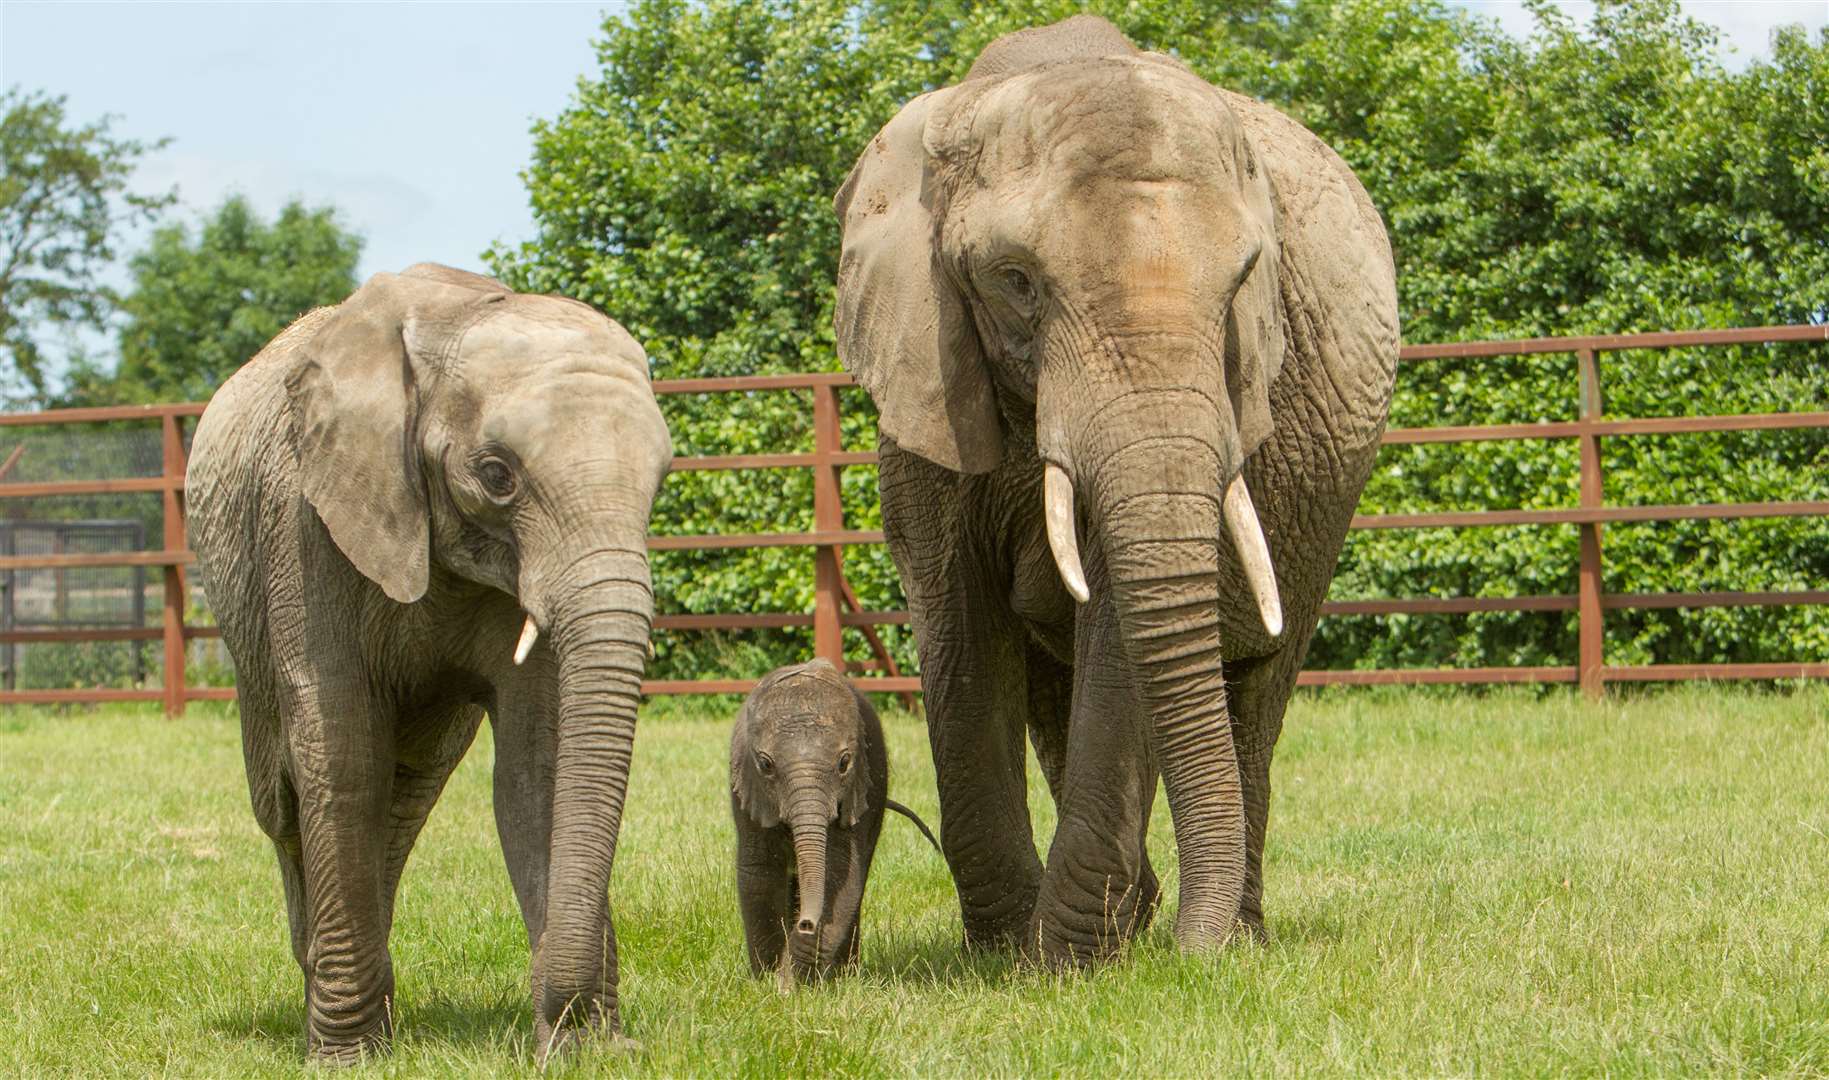 Enjoy unlimited visits to Port Lympne and Howletts with an annual family pass. Picture: Aspinall Foundation